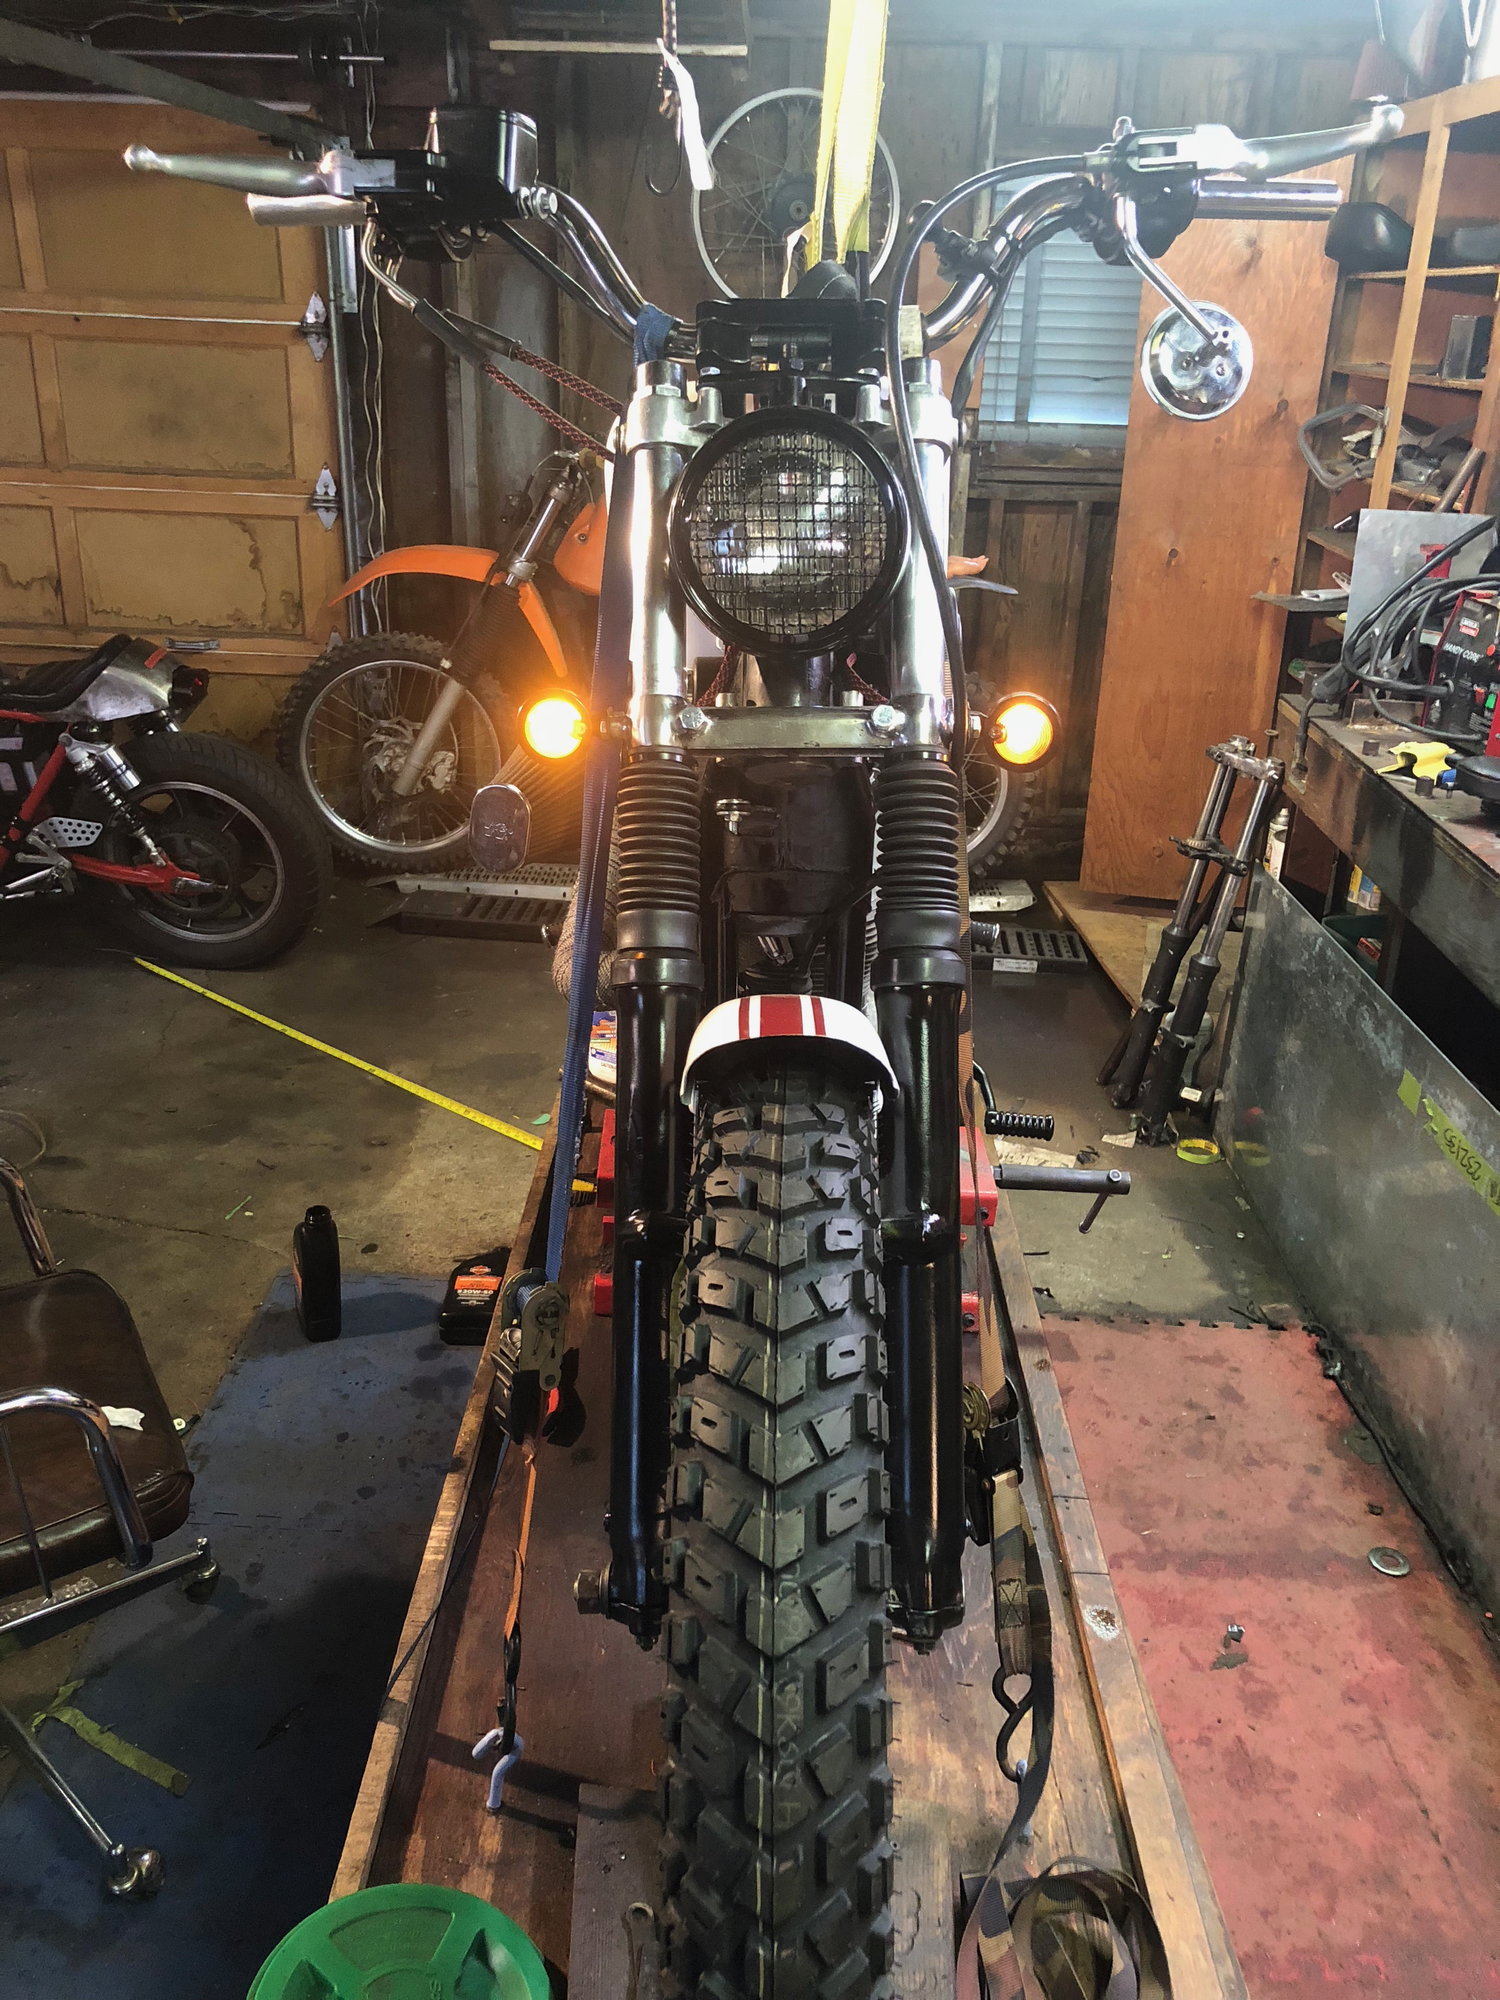 Sportster Wont Start No Headlight Only Signals On On Accessory Harley Davidson Forums